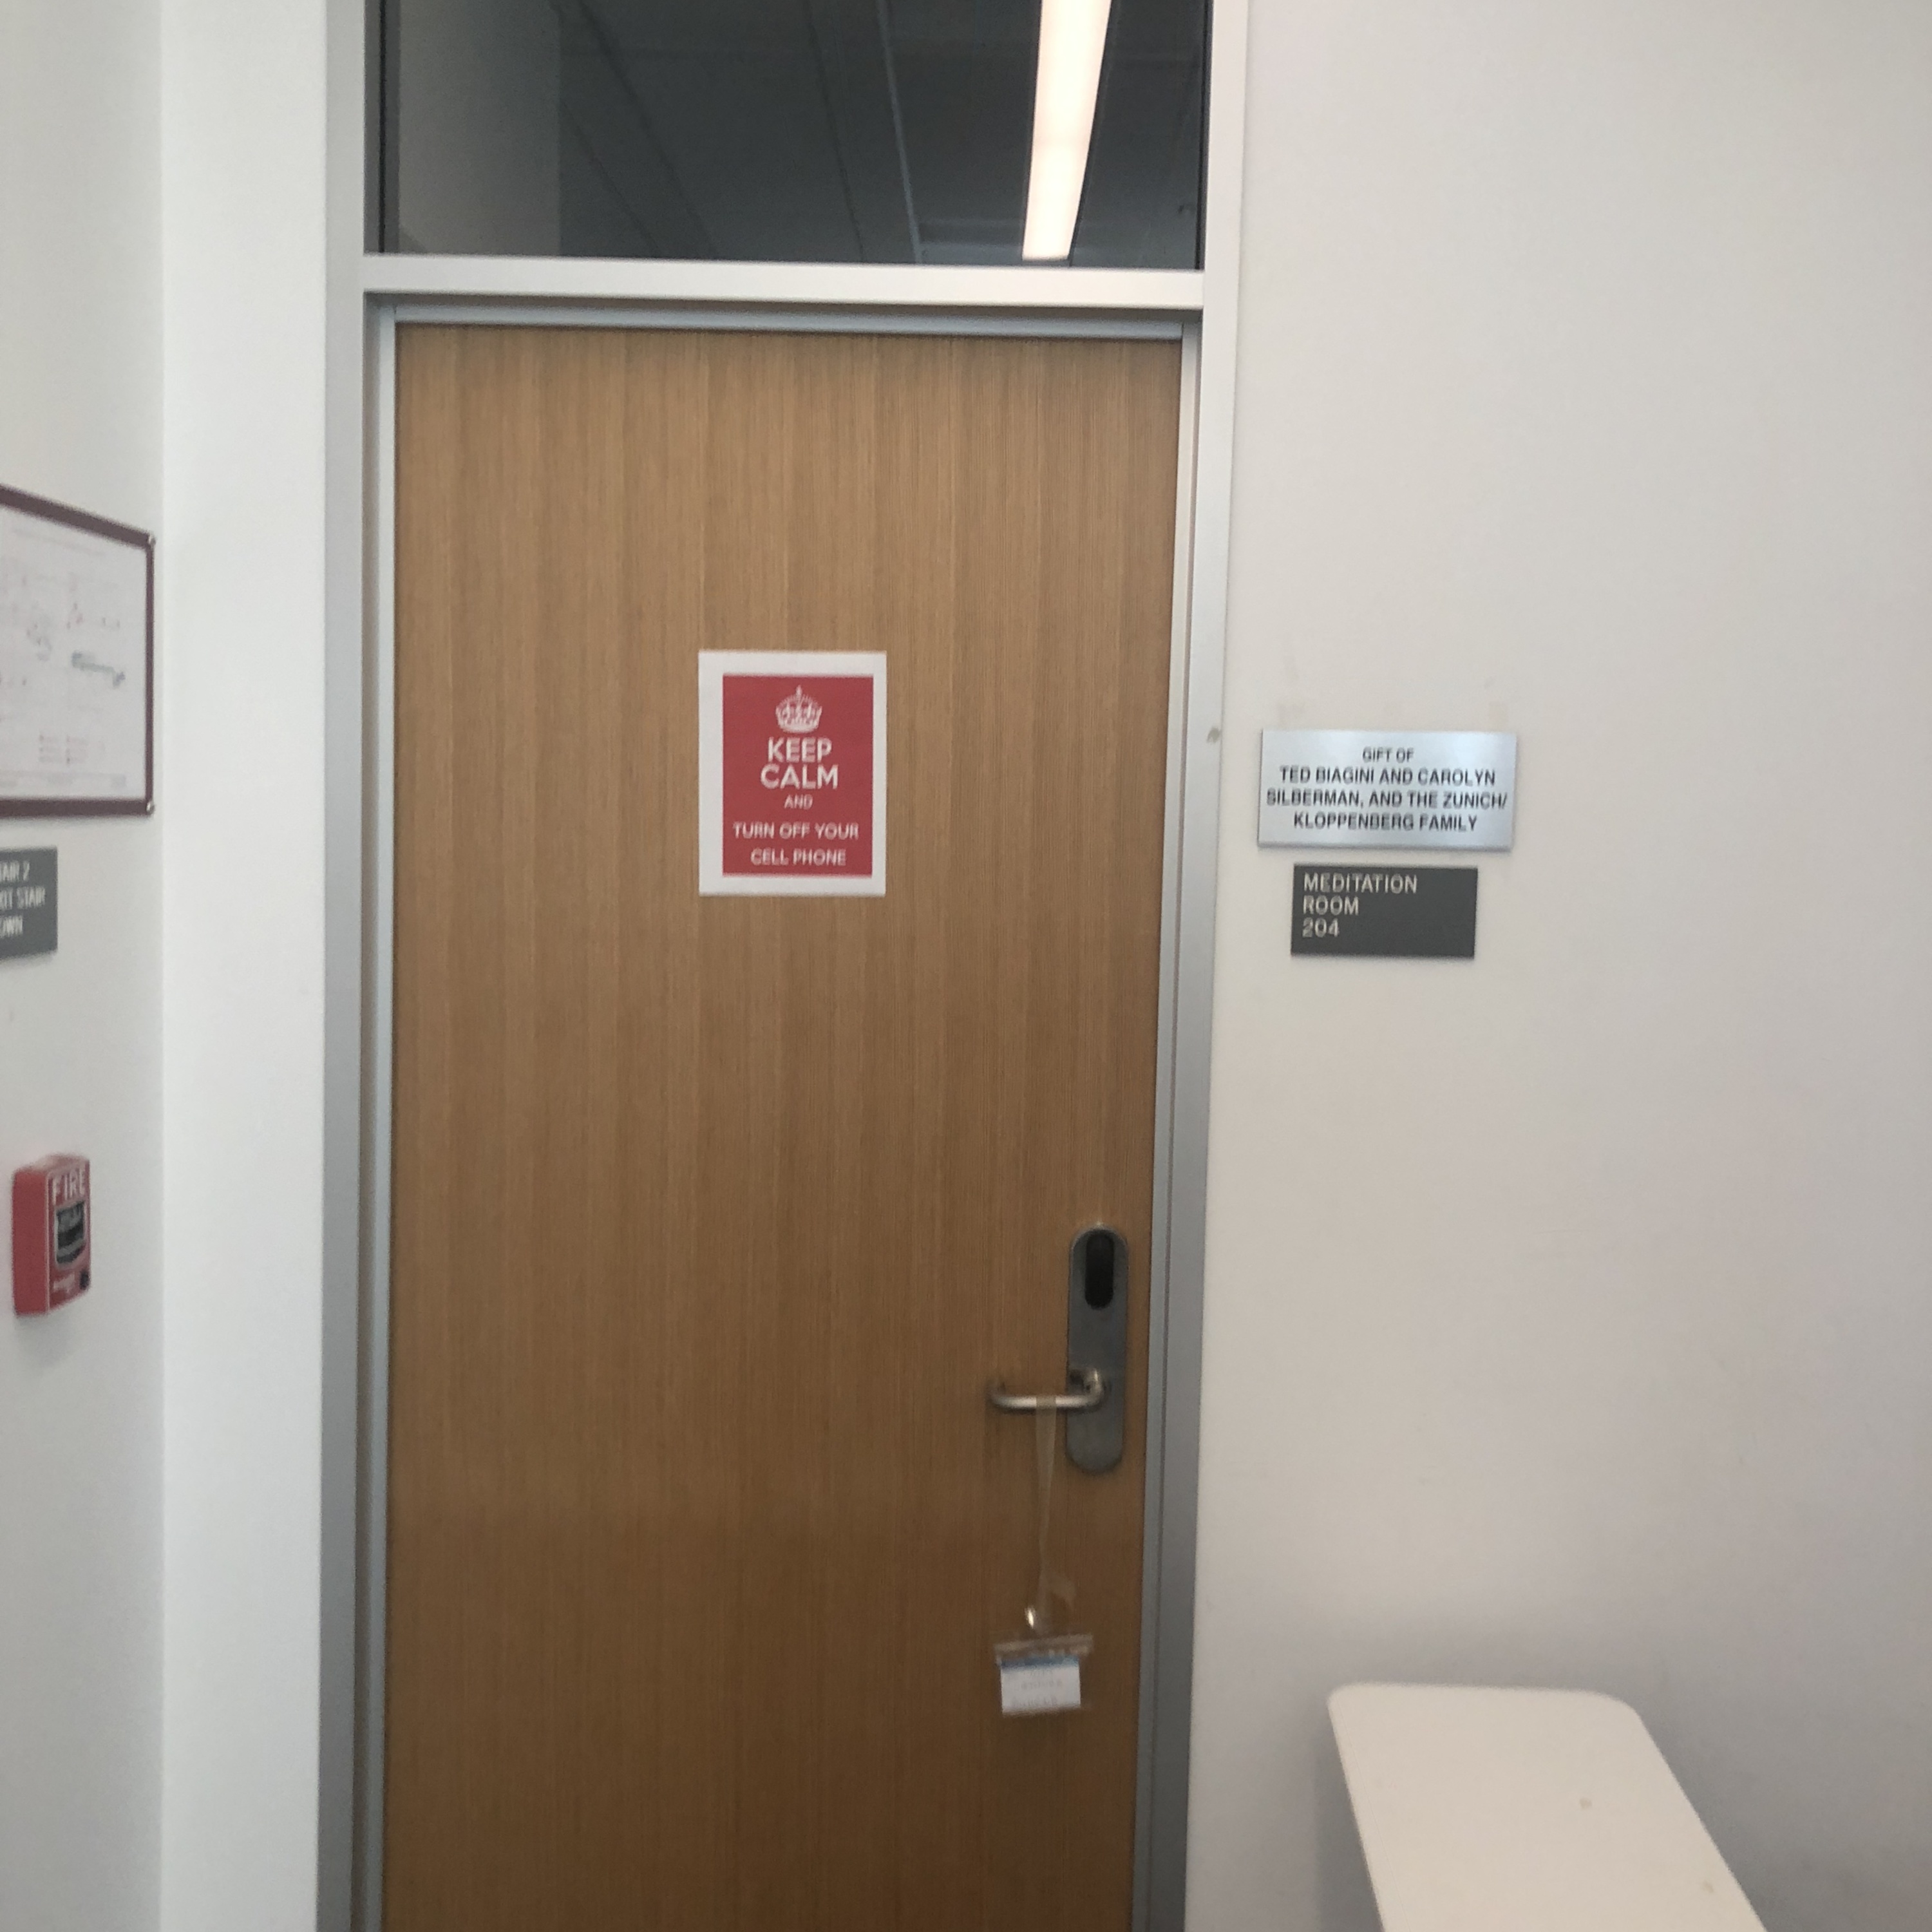 Charney Hall—Miscellaneous Restricted Spaces